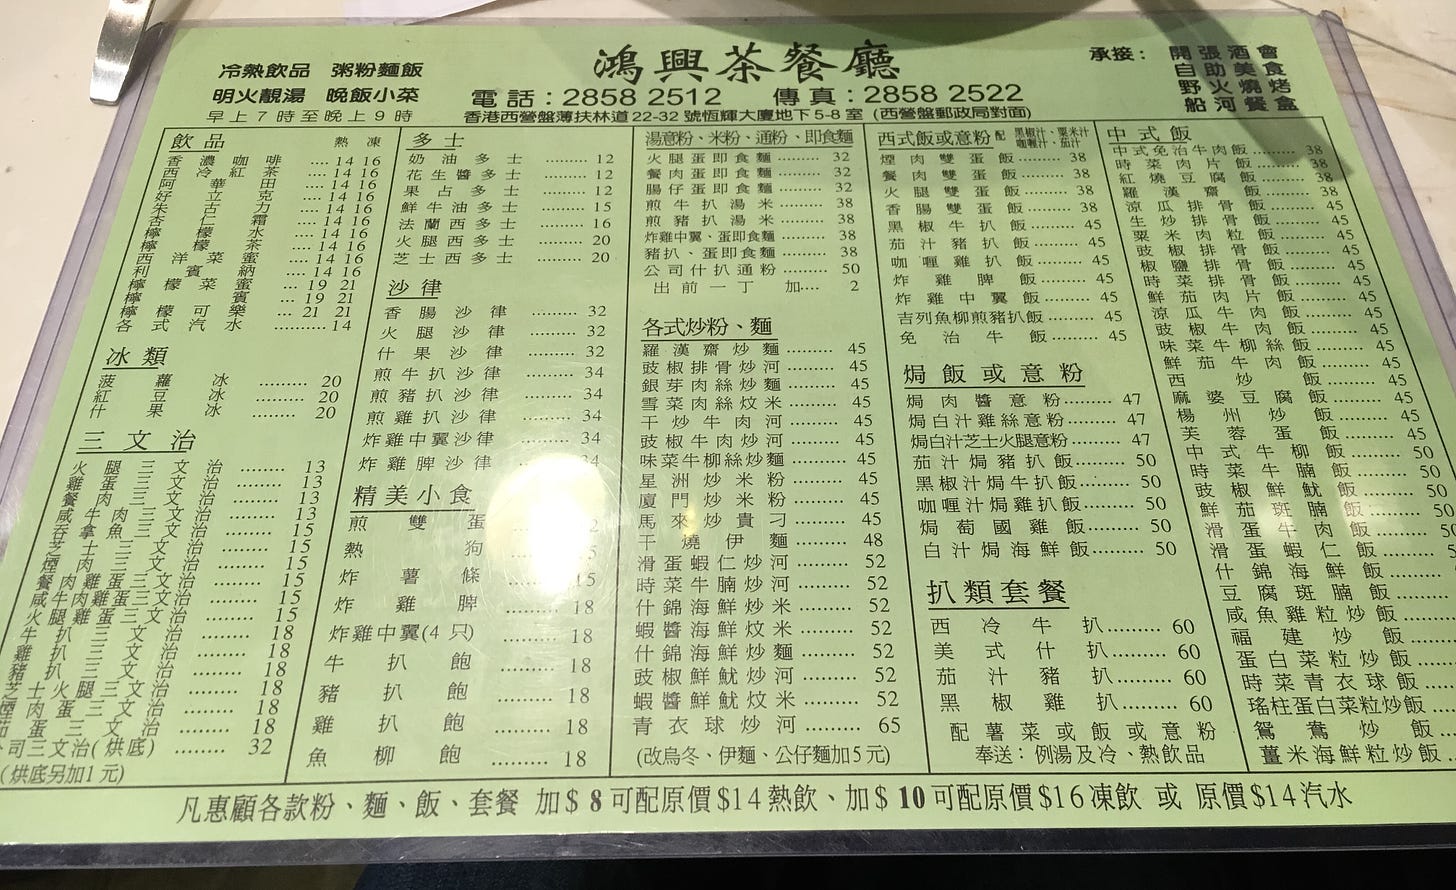 An image of a laminated menu of a Hong Kong Tea restaurant which also doubles as a placemat